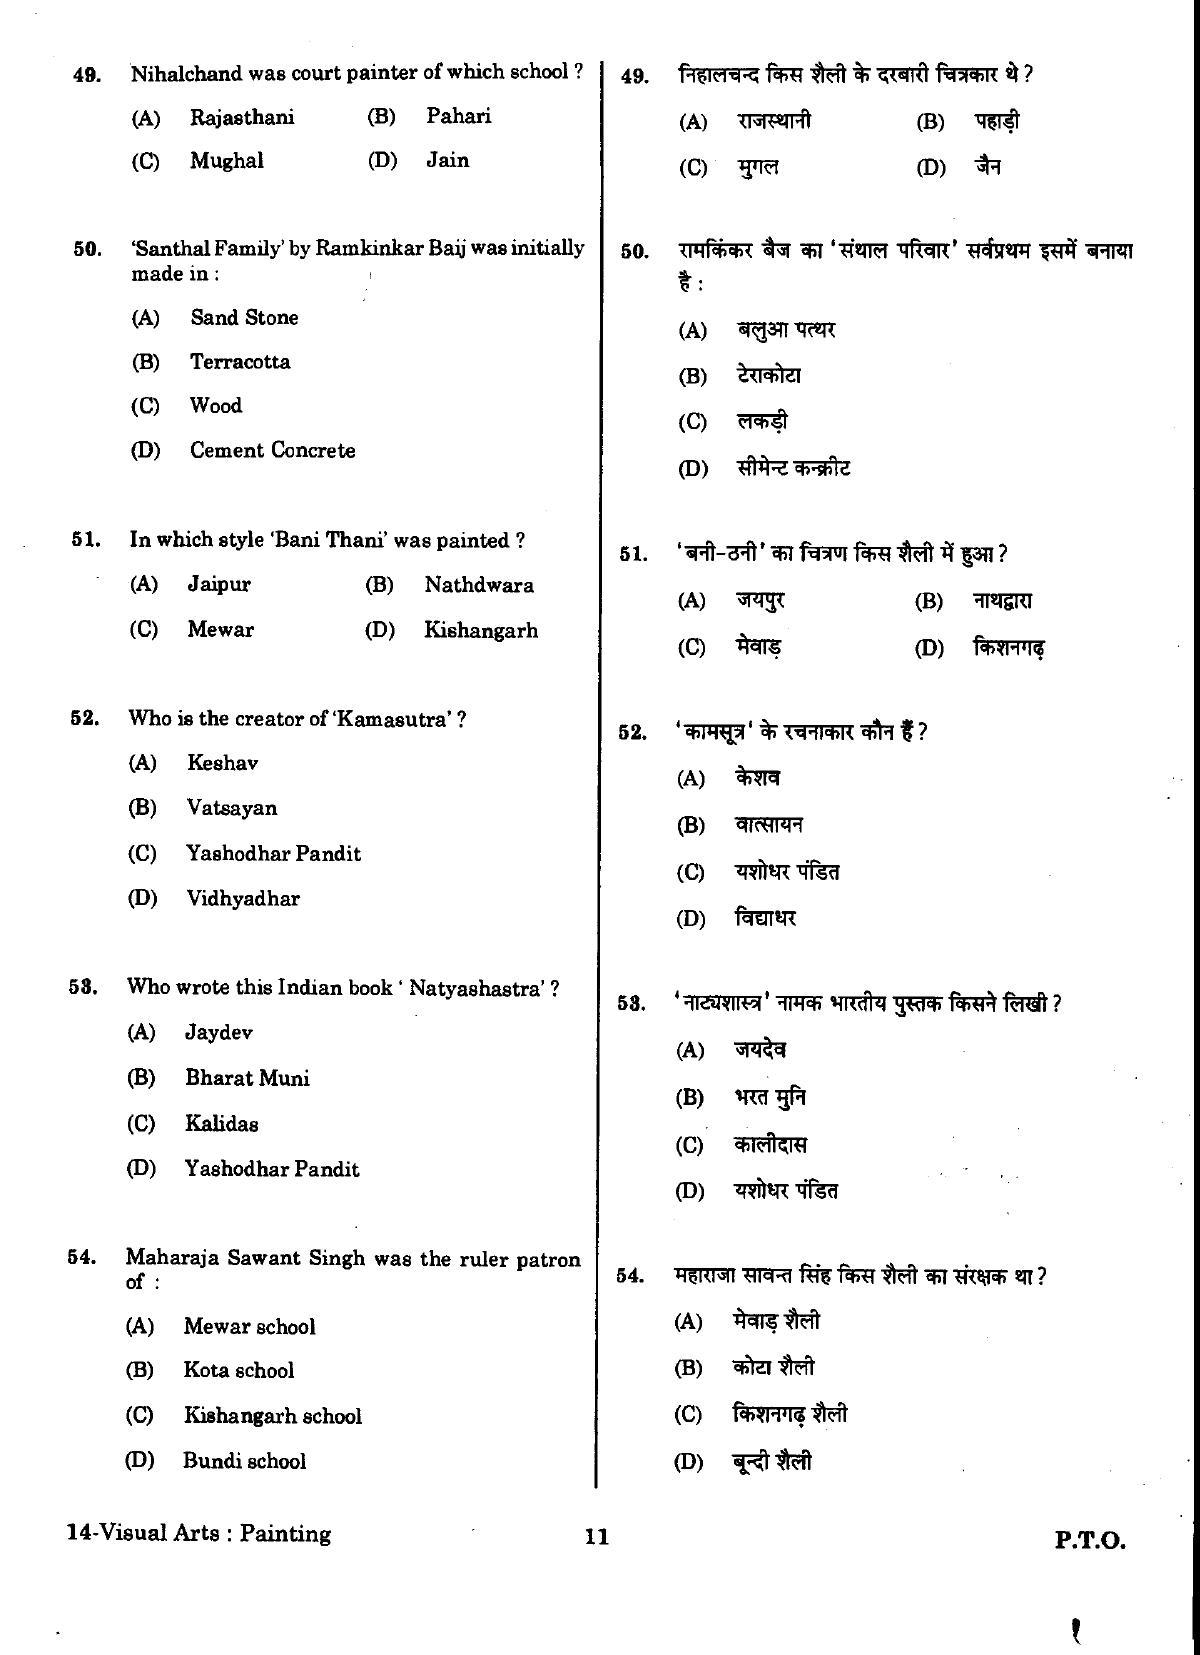 URATPG Visual Arts Painting Sample Question Paper 2018 - Page 10